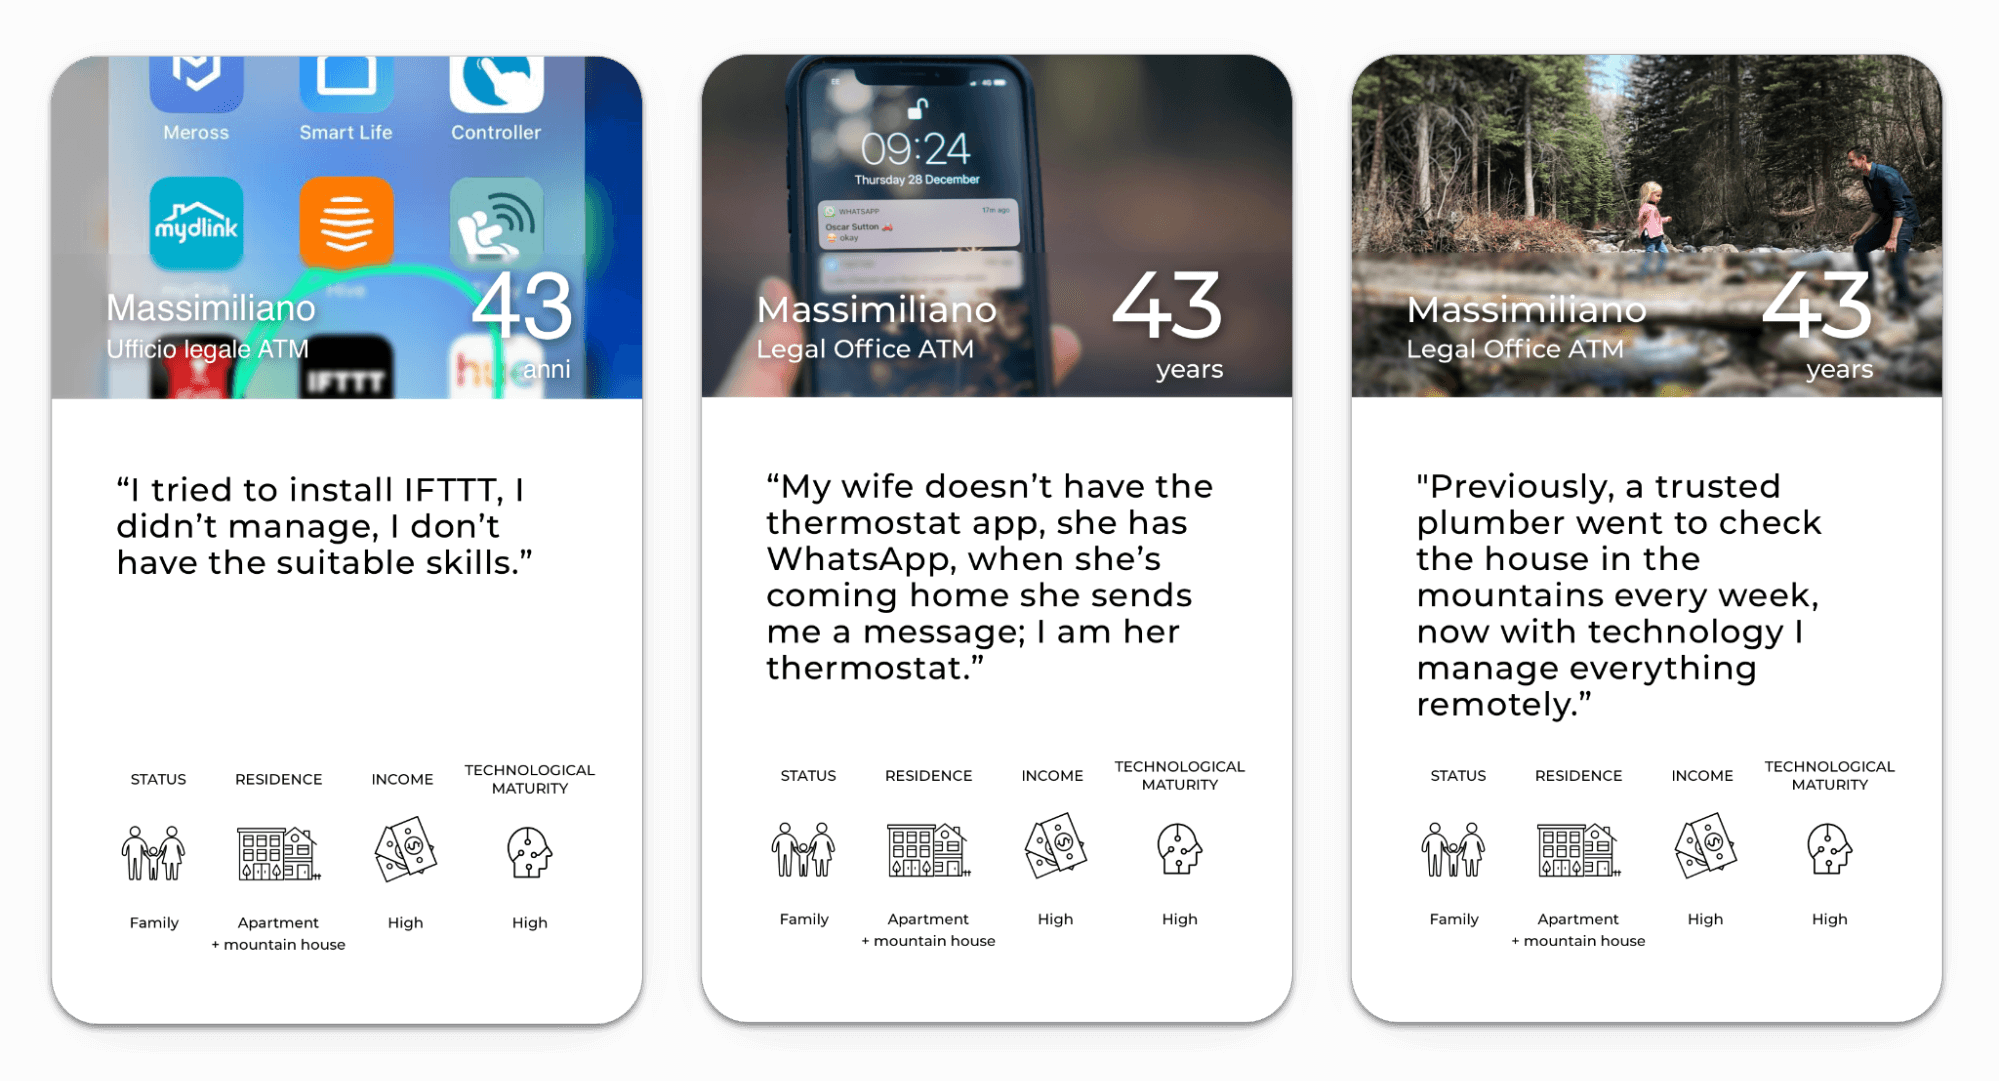 Three cards, each showing a different lifestyle photo, a quote that correlates to that dynamic self's attitude about technology, and some basic demographic info